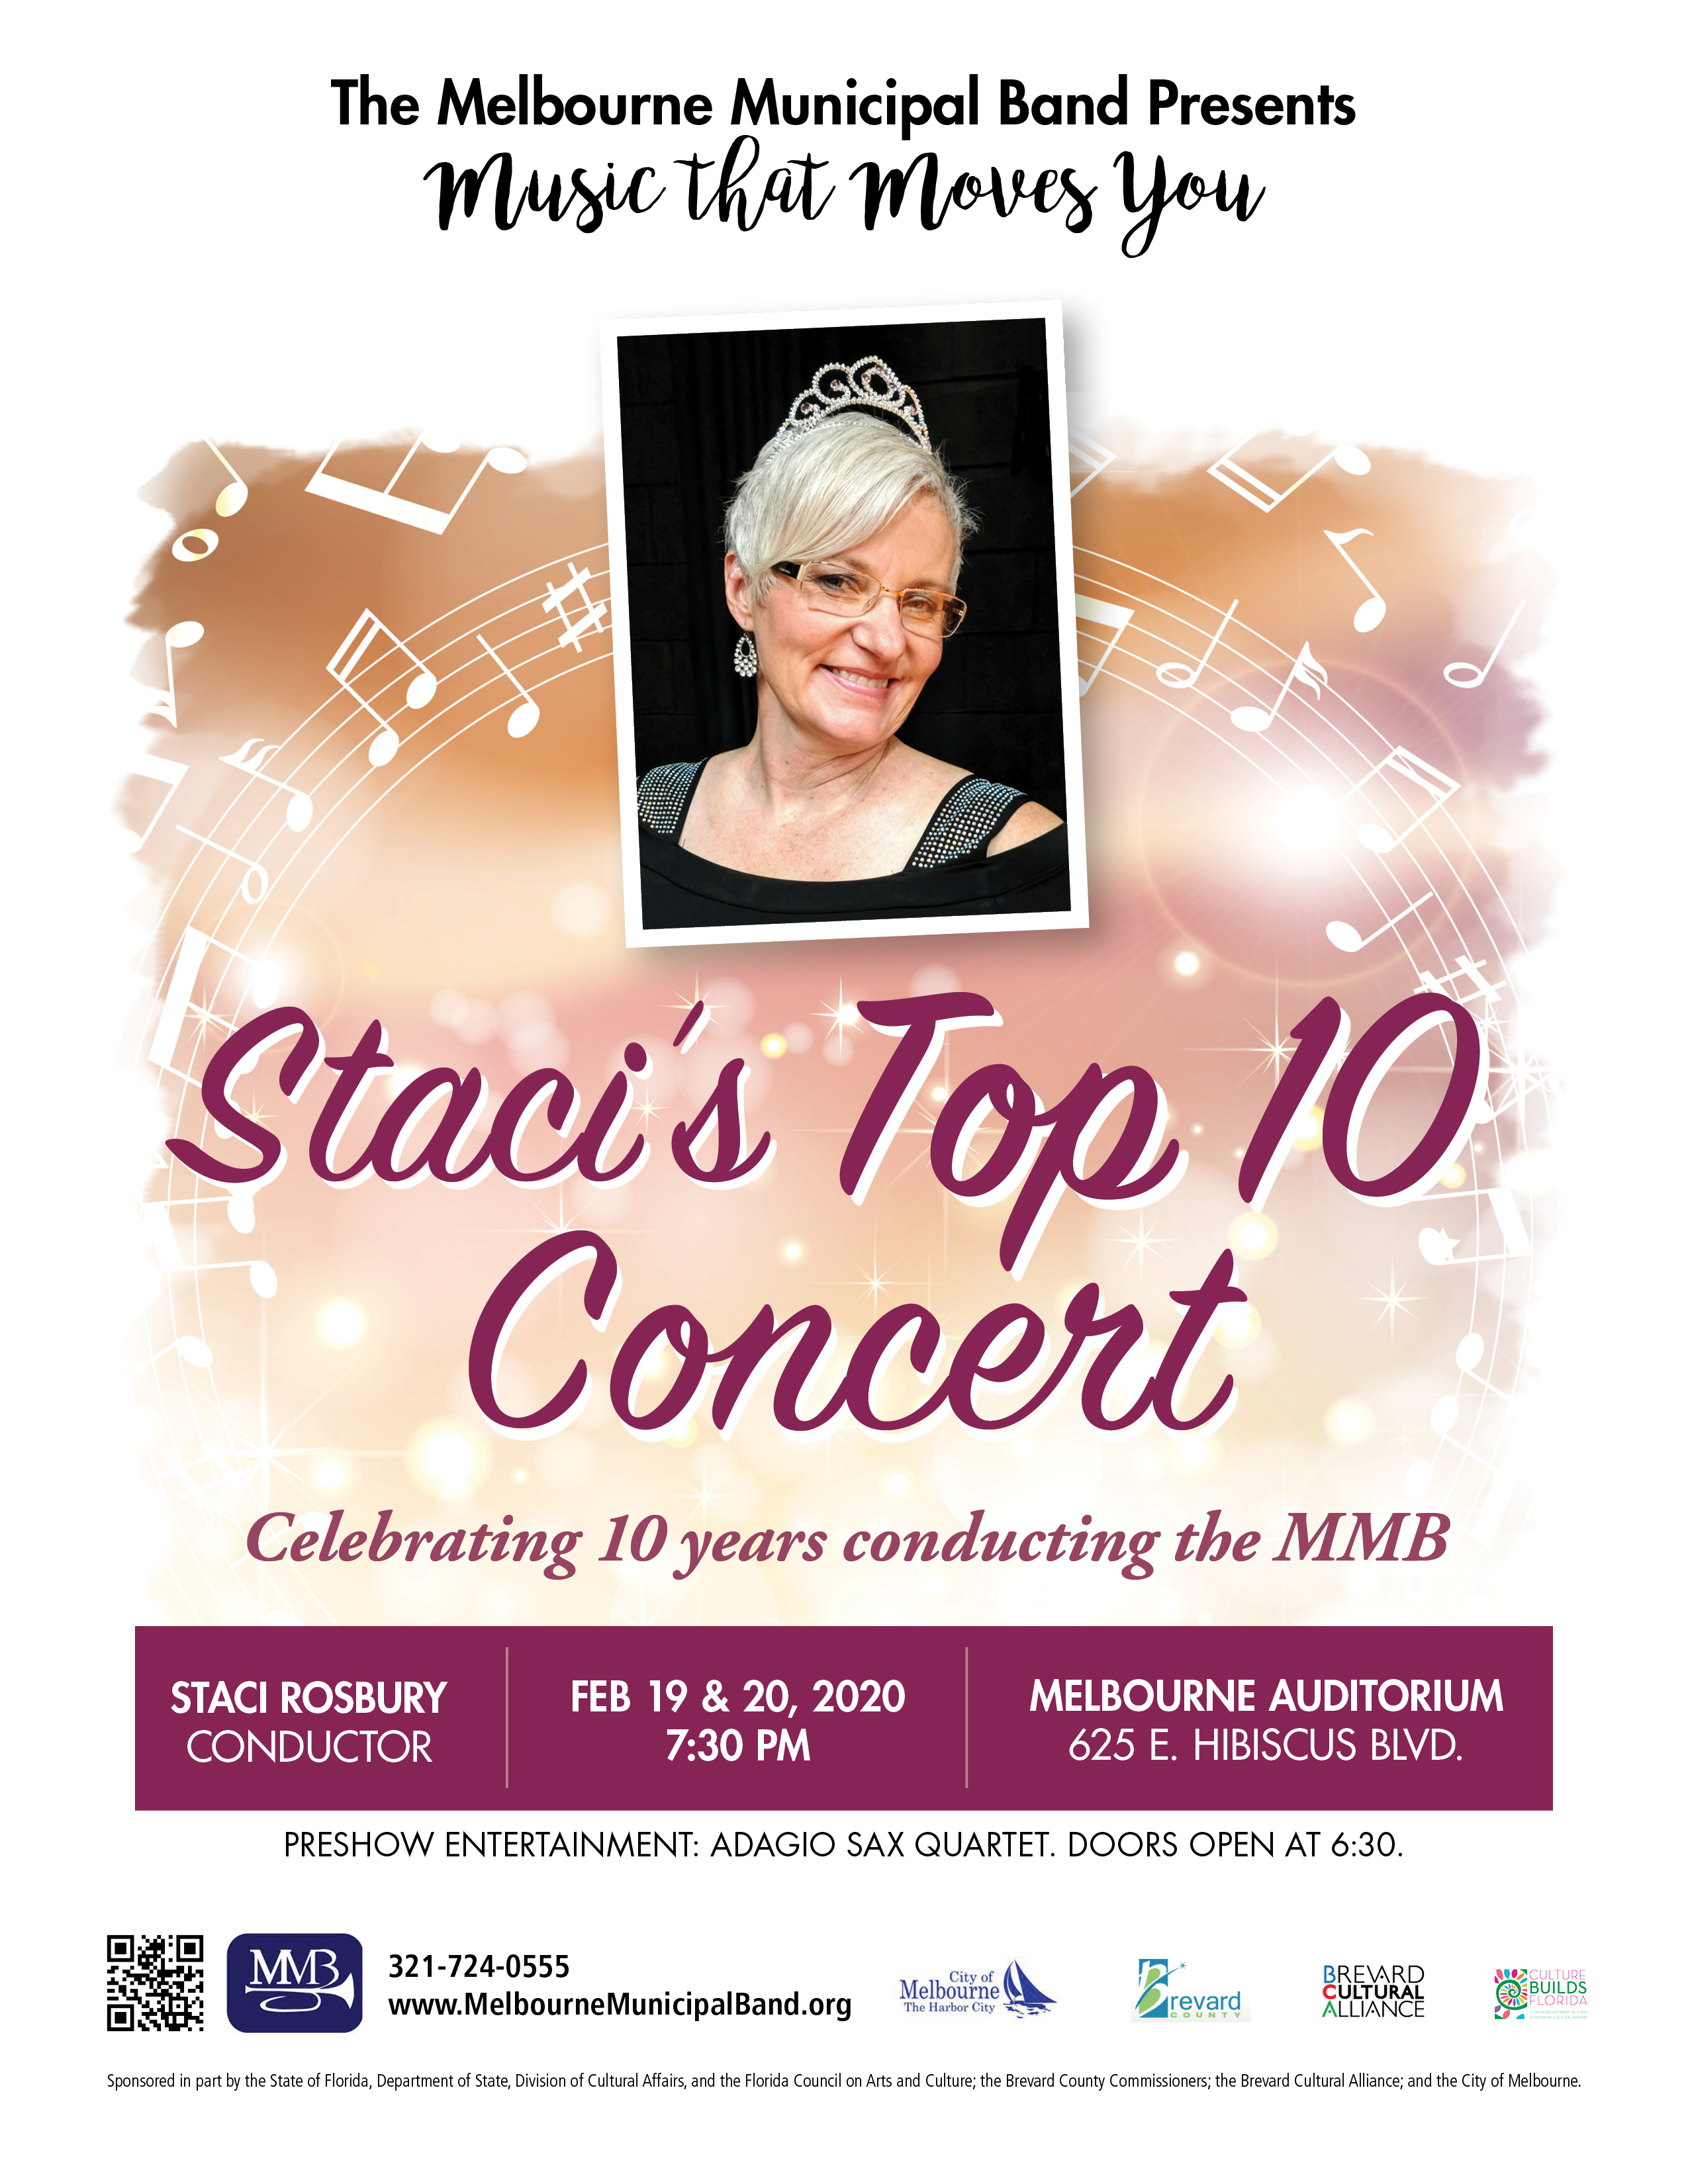 'Staci's Top 10 Concert' presented by The Melbourne Municipal Band